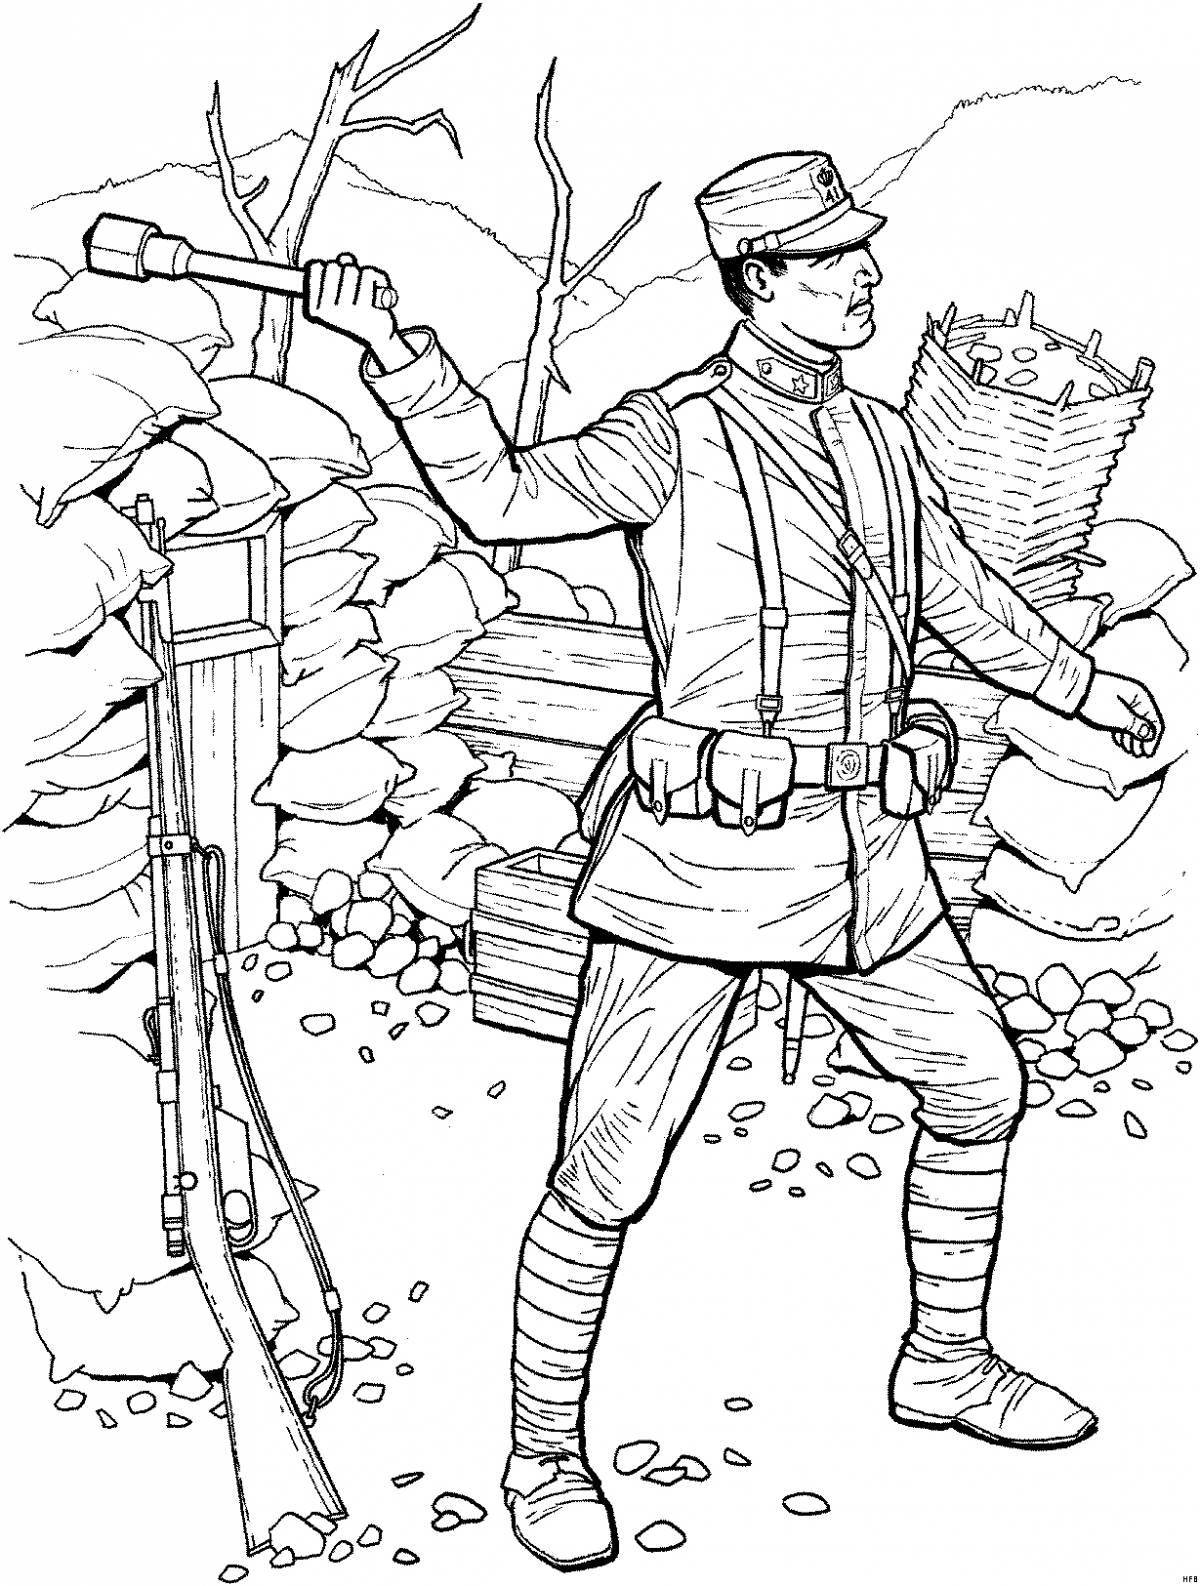 Coloring page graceful ussr soldier